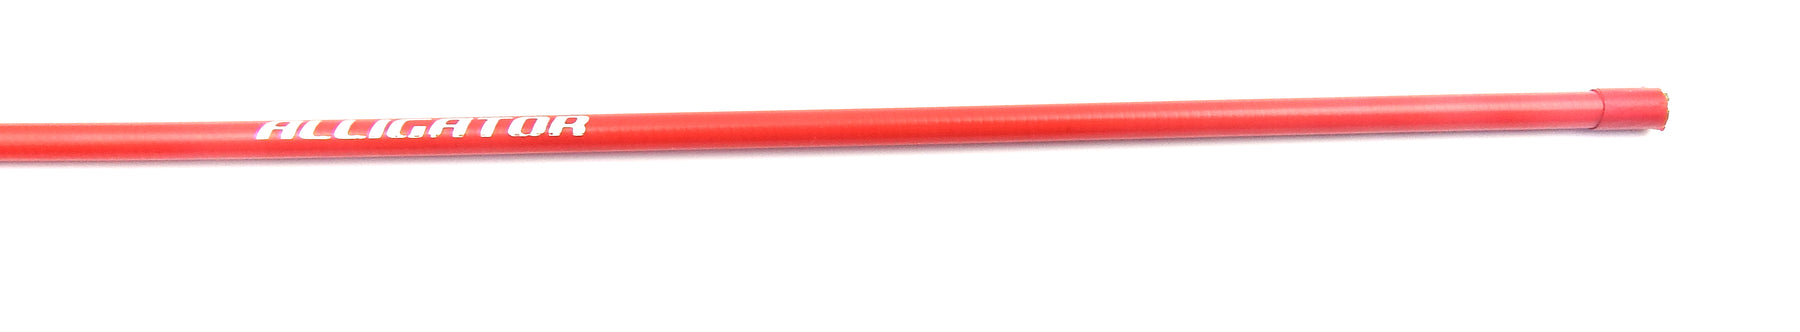 Cable - Universal Outer - 5mm - Teflon Lined - Red - Per Metre